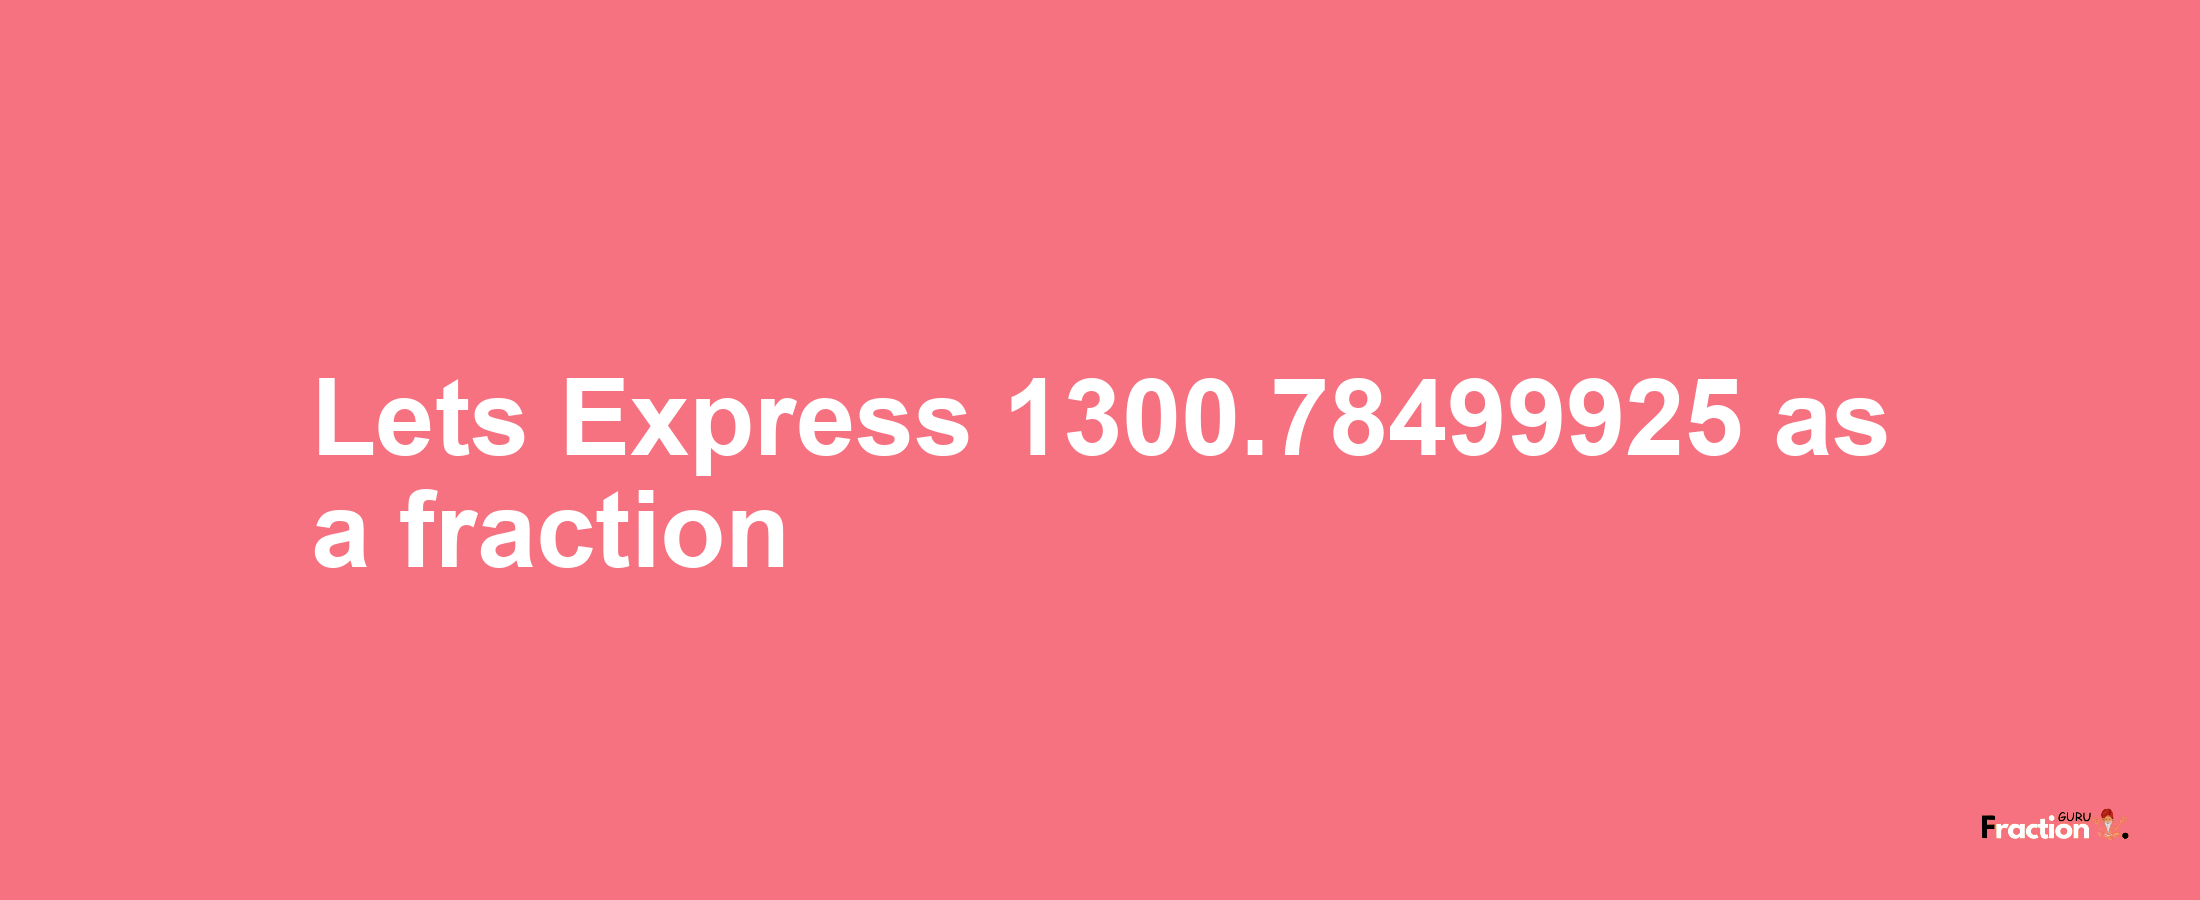 Lets Express 1300.78499925 as afraction